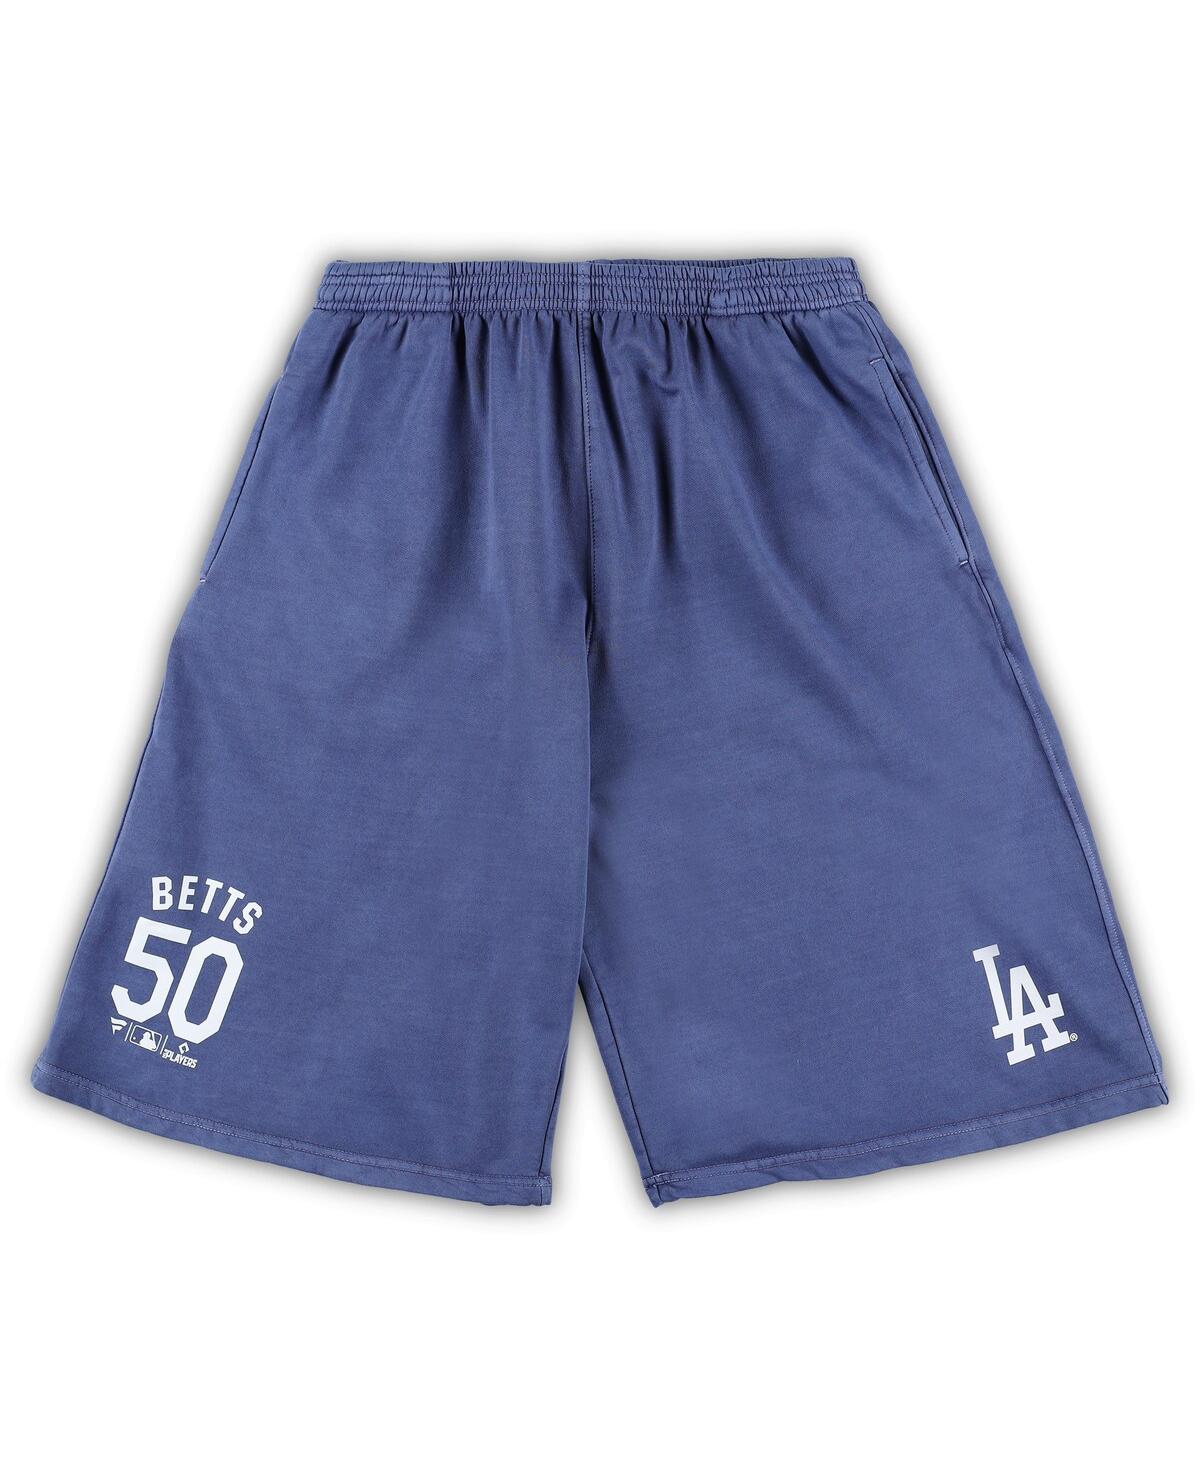 PROFILE MEN'S MOOKIE BETTS ROYAL LOS ANGELES DODGERS BIG AND TALL STITCHED DOUBLE-KNIT SHORTS